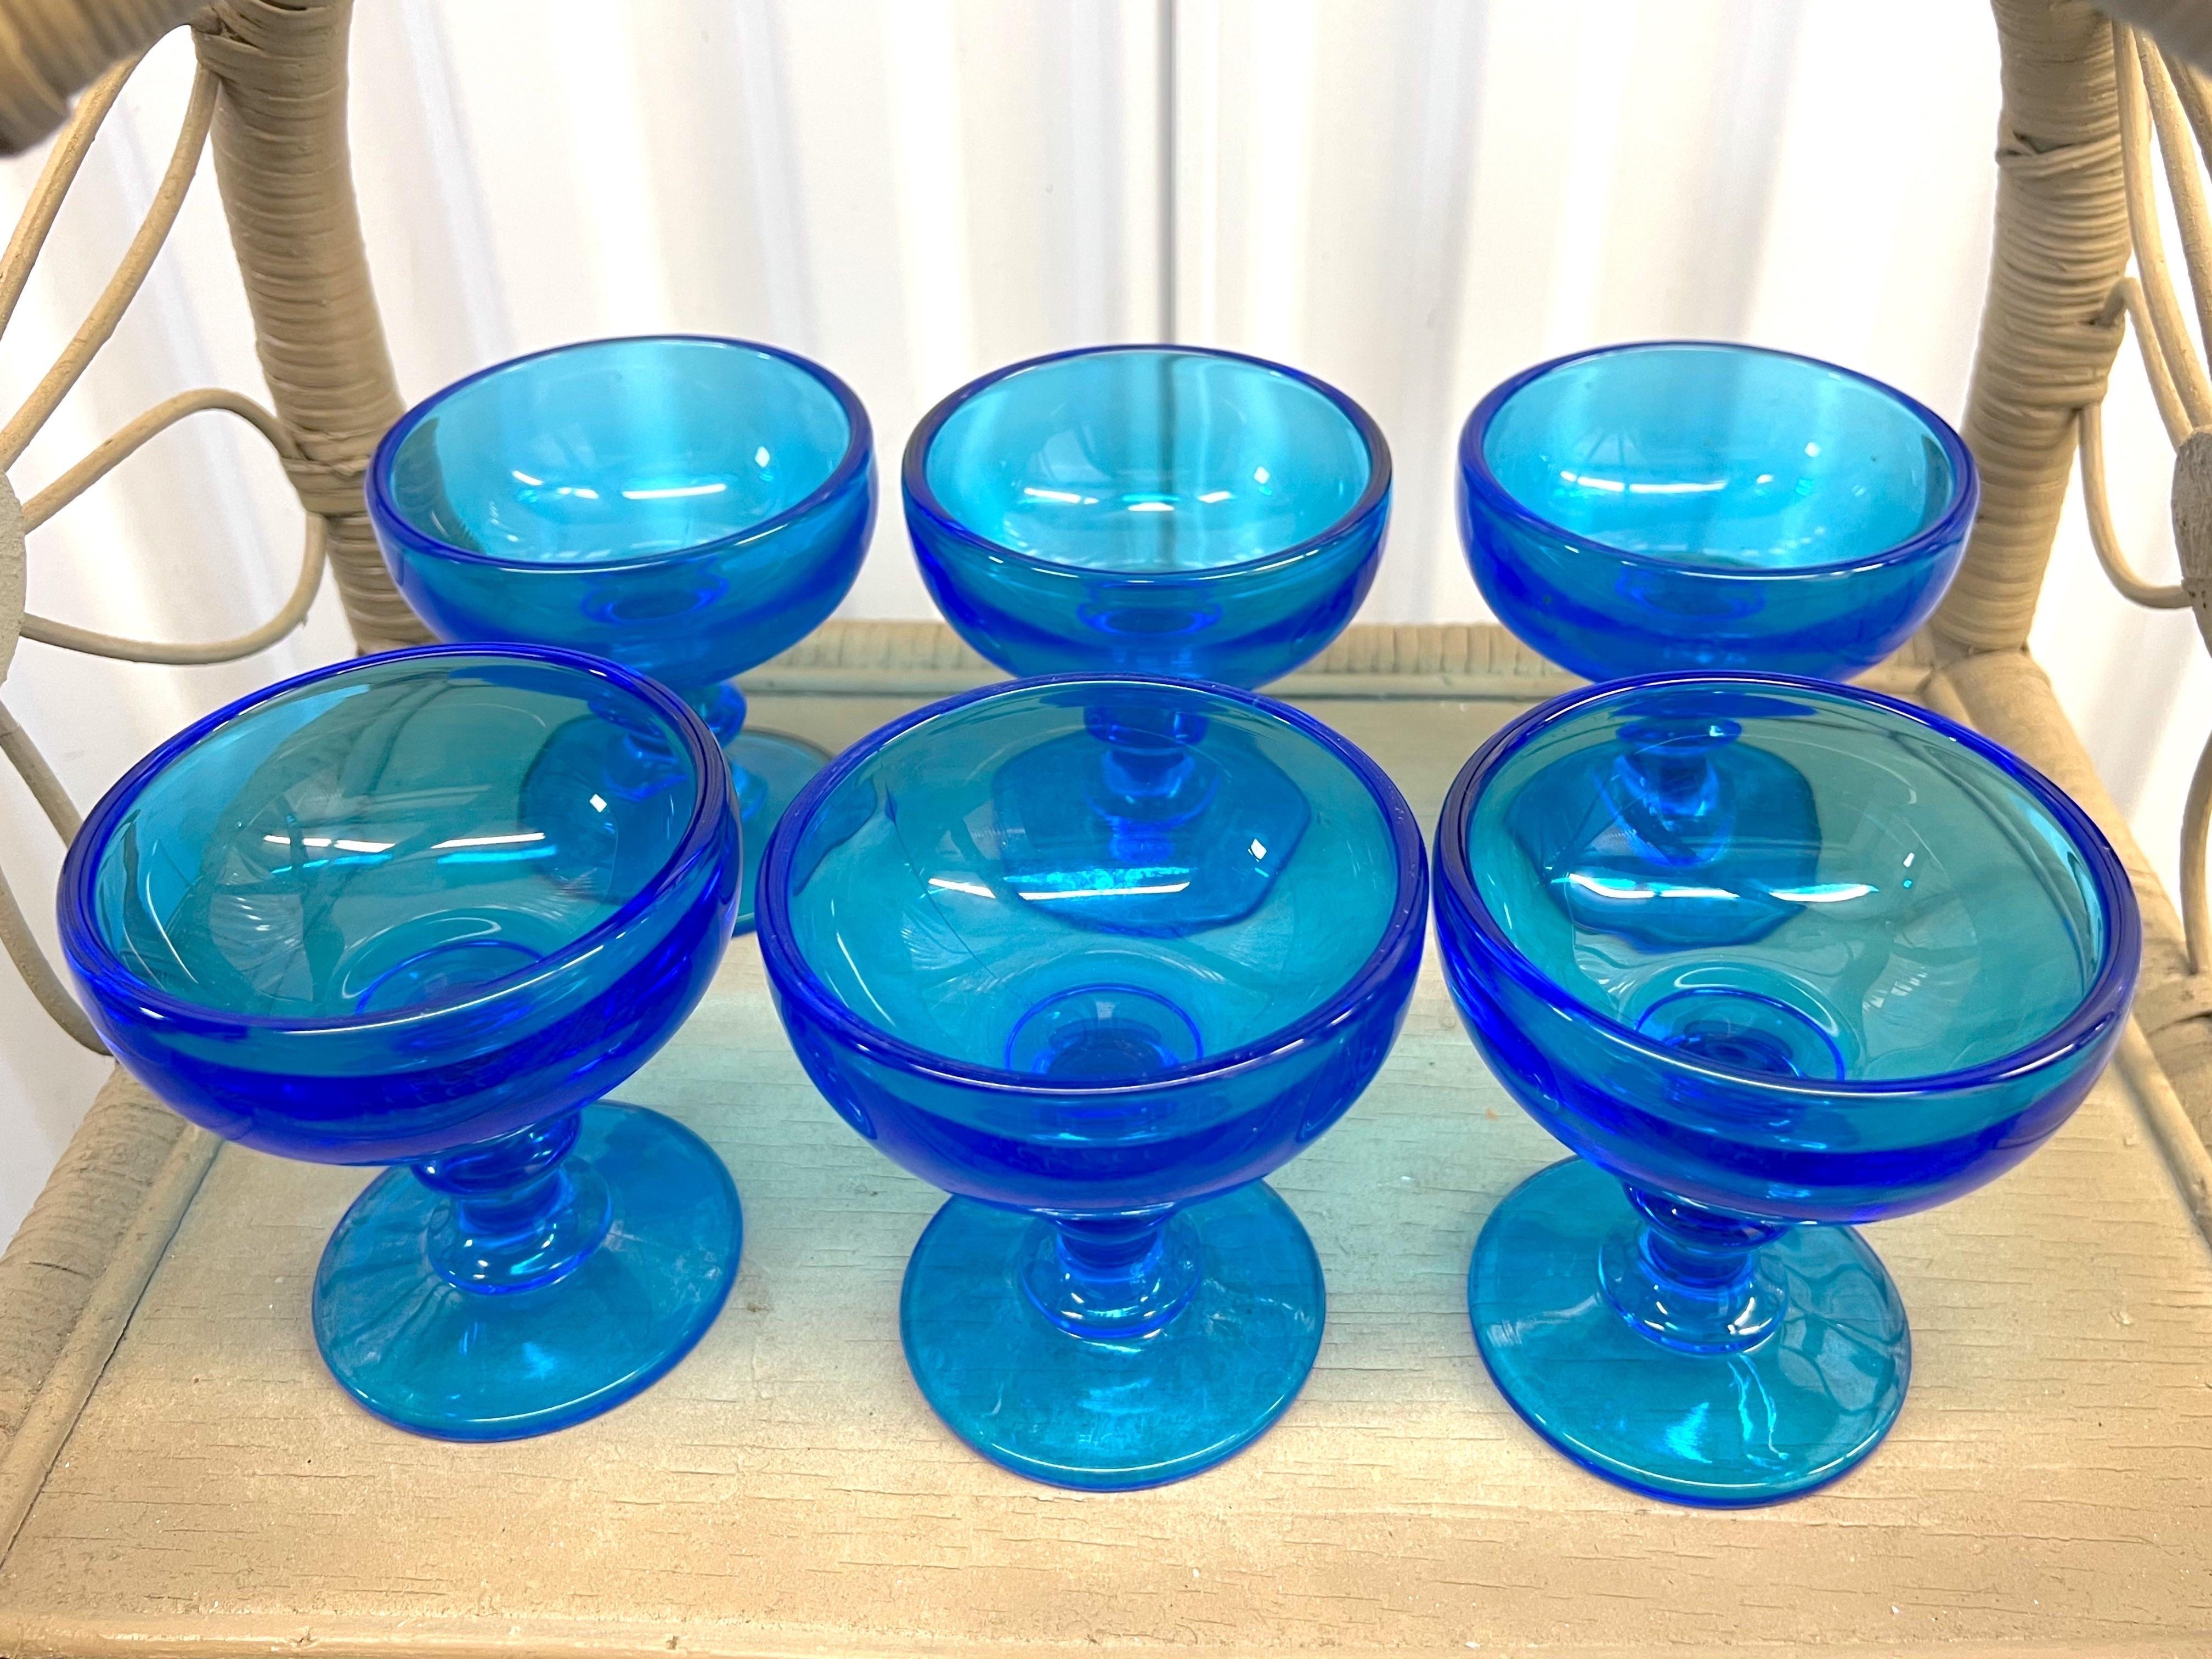 Early 20th Century Cobalt Blue Champagne/ Dessert Glasses - Set of 6 For Sale 2